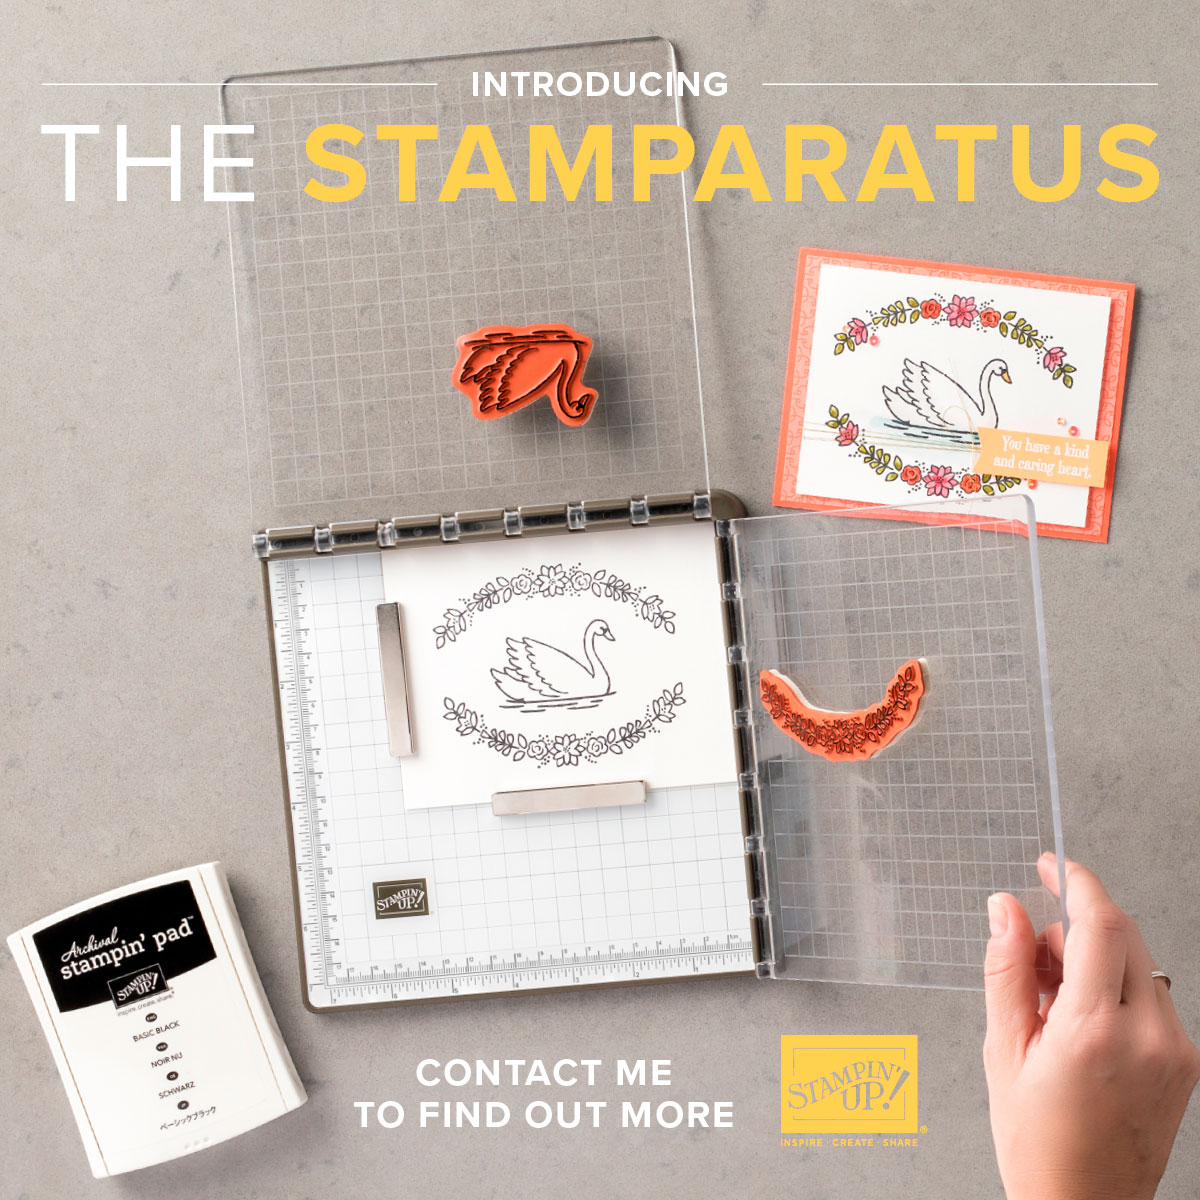 The Stamparatus is here!